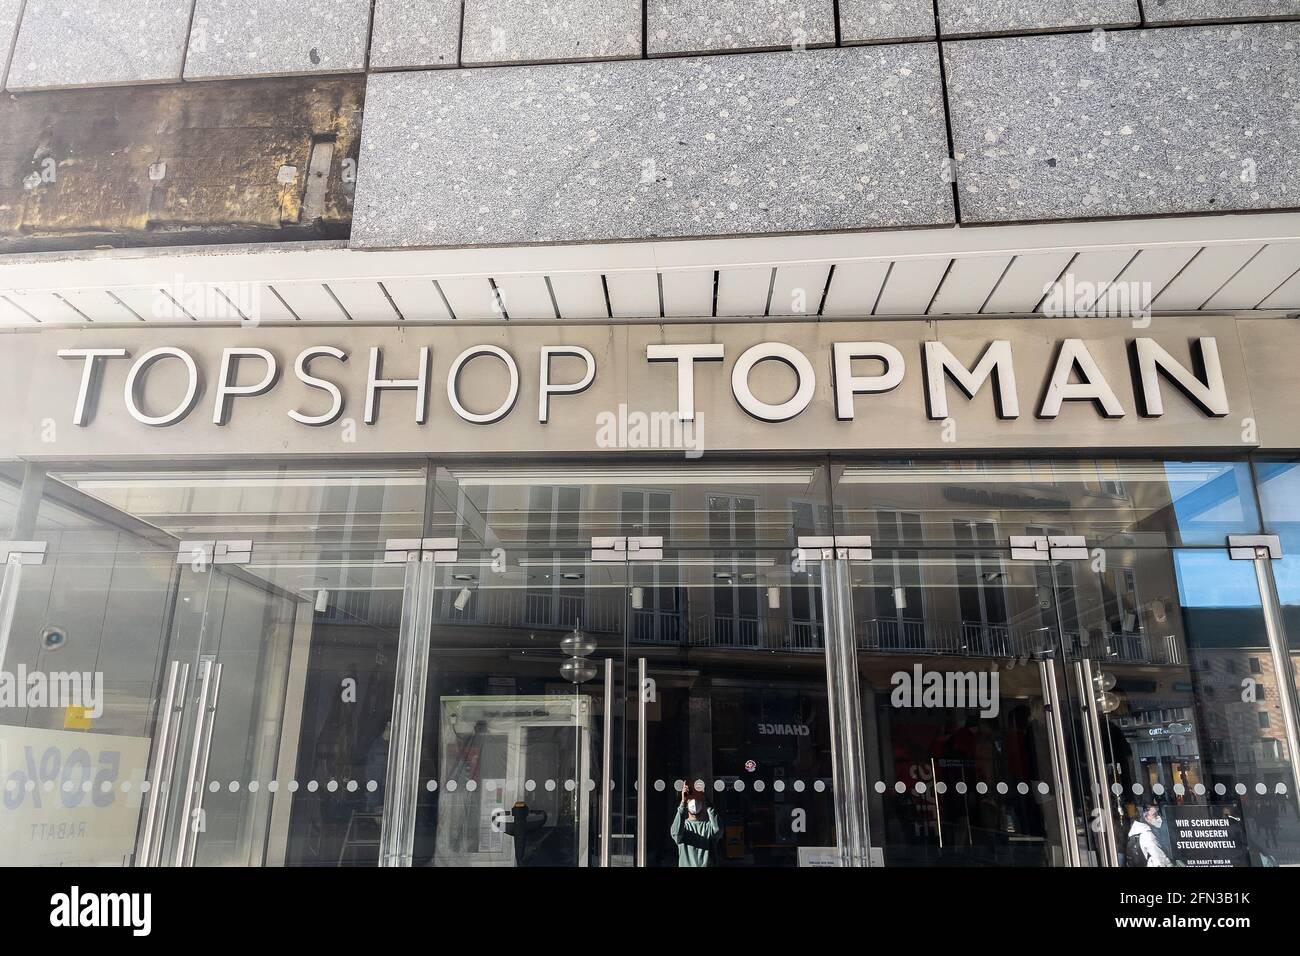 Topshop and Topman fashion retail store sign in Munich Stock Photo - Alamy